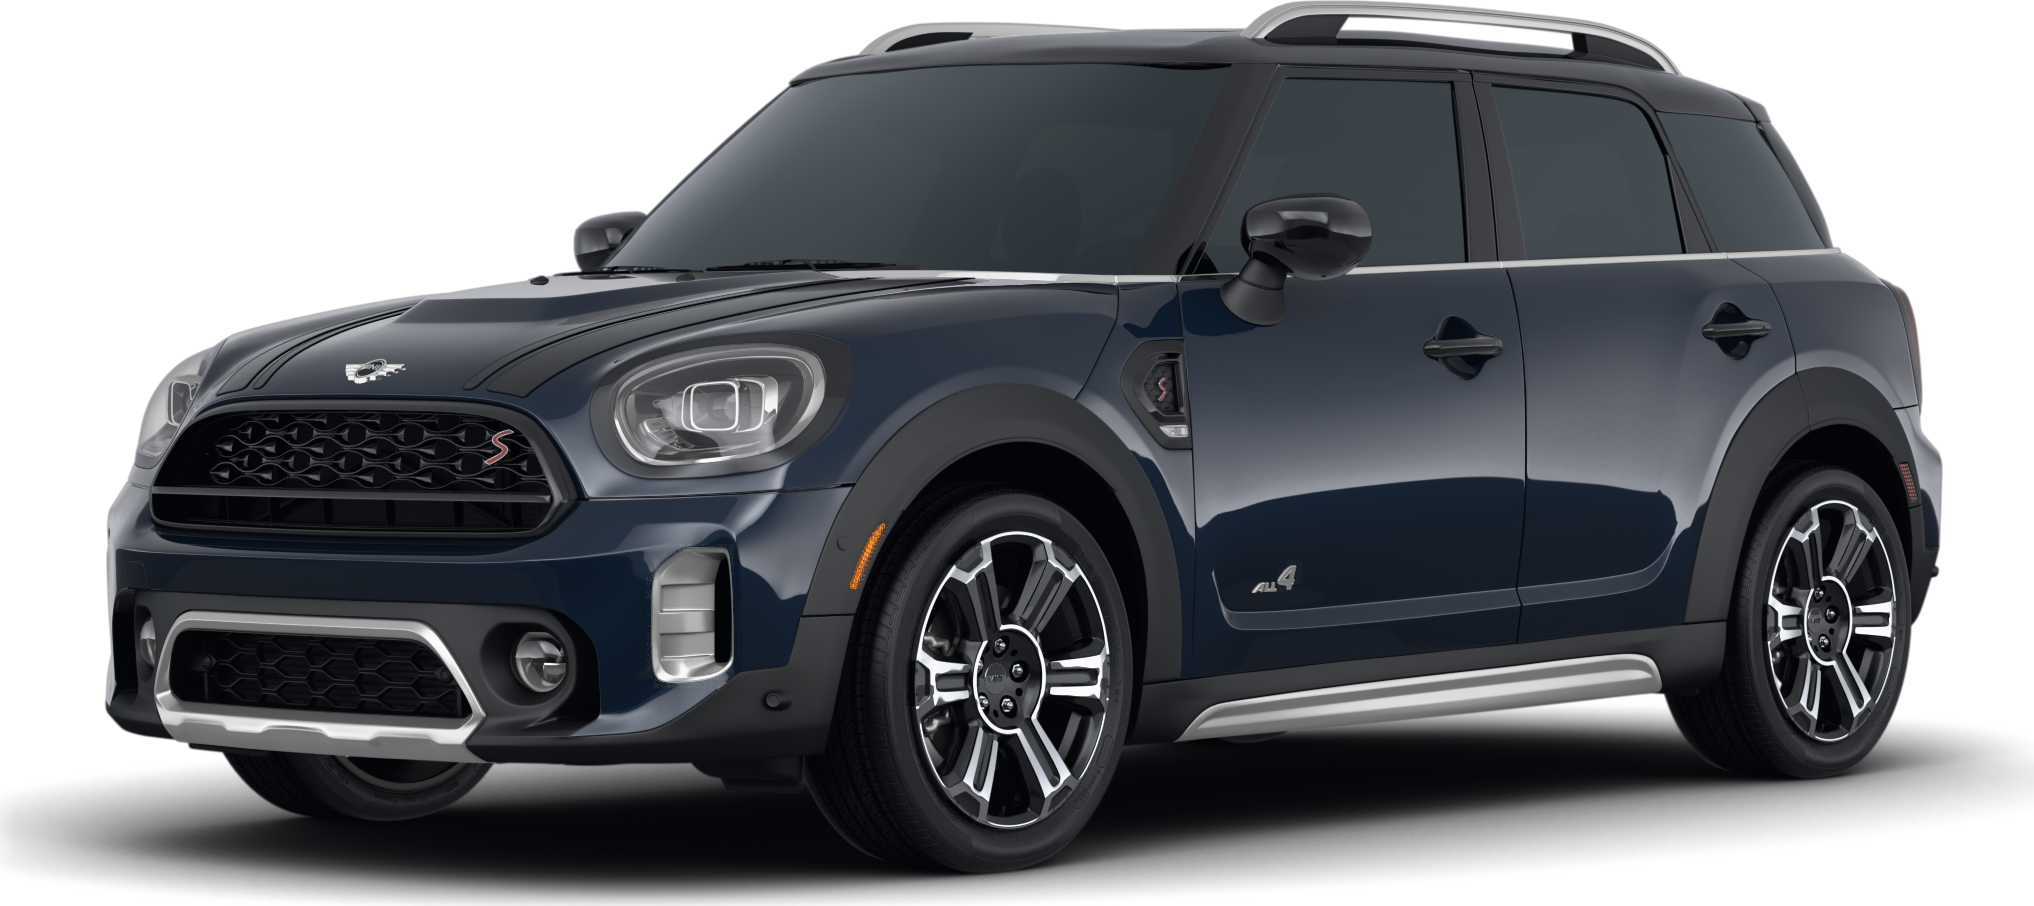 https://file.kelleybluebookimages.com/kbb/base/evox/CP/15353/2023-MINI-Countryman-front_15353_032_2034x906_C3Y_cropped.png